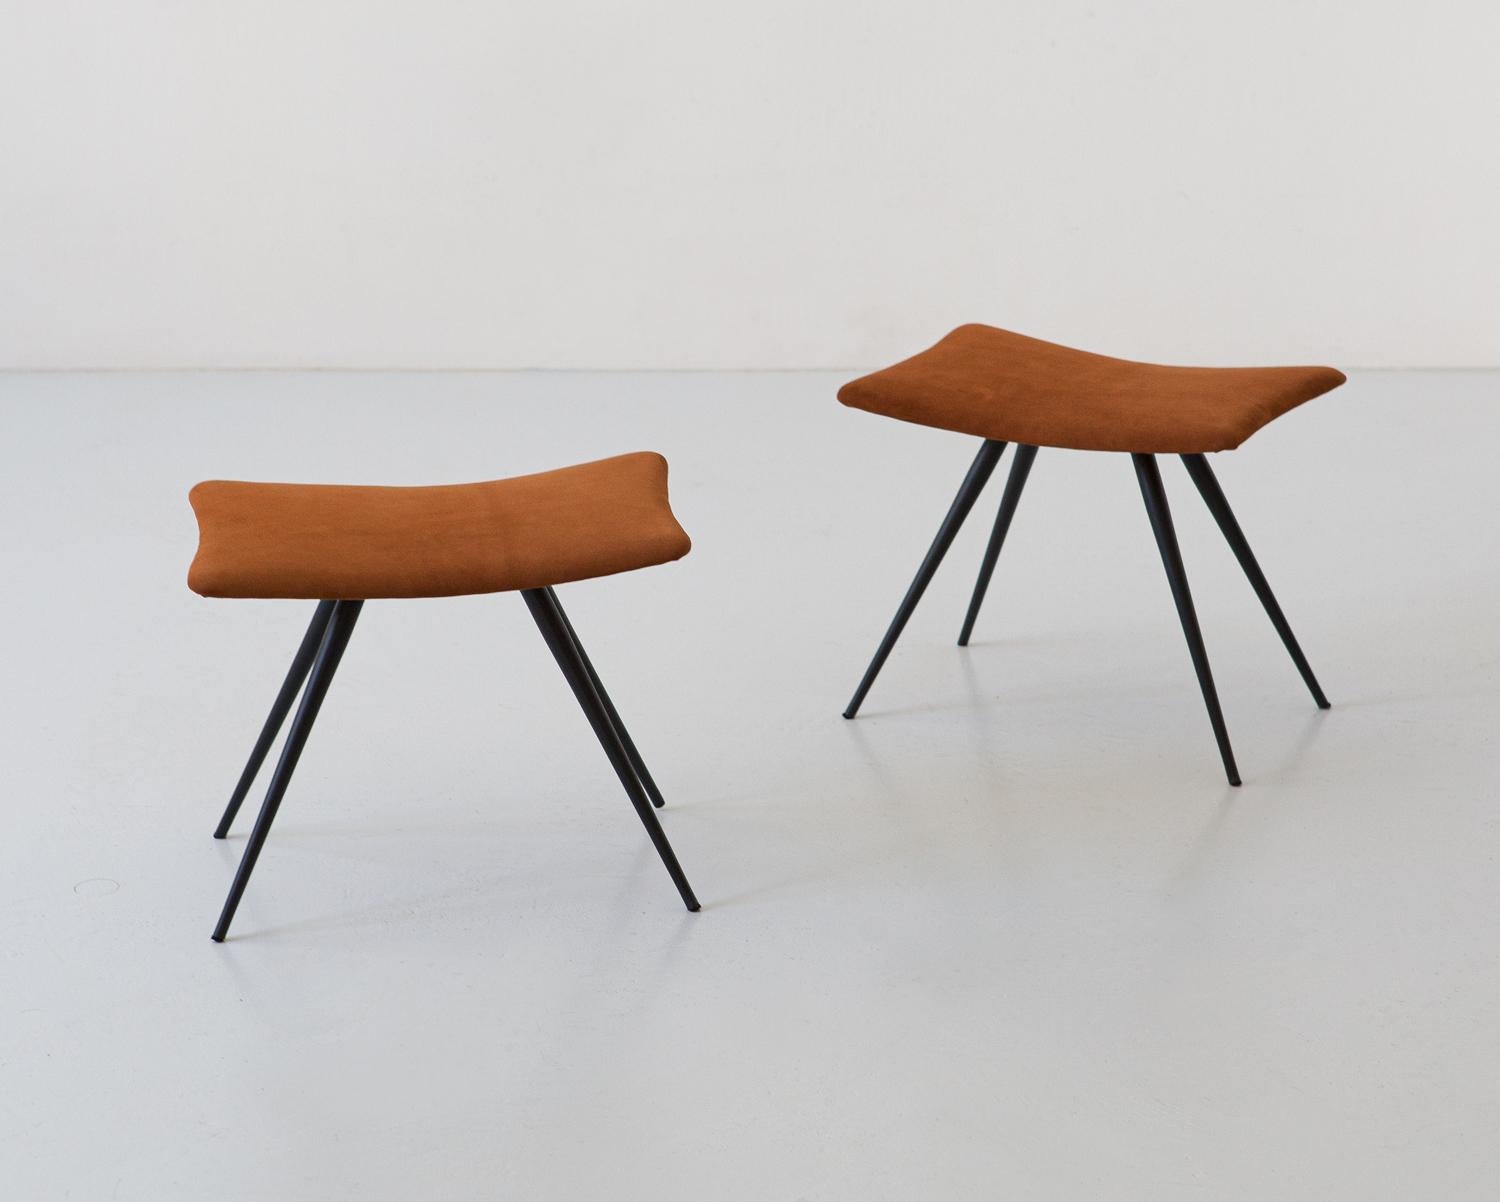 Mid-Century Modern Pair of Italian Stools in Cognac Suede Leather And Black Steel Conical Legs